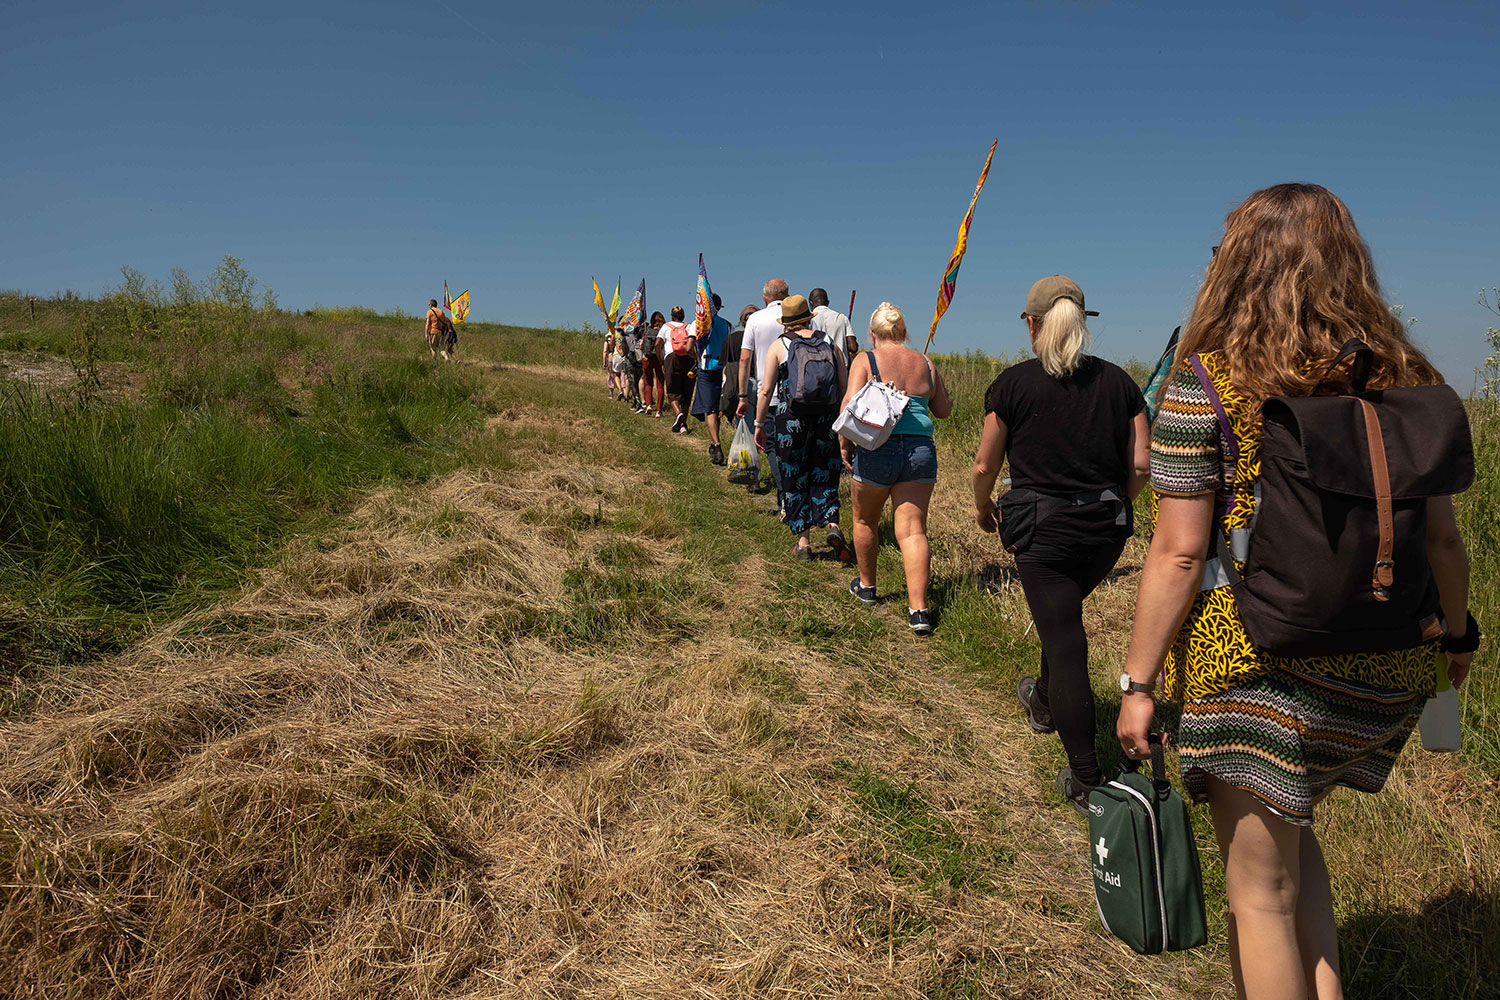 A line of walkers stretches into the distance over the dry grass of Rainham marshes